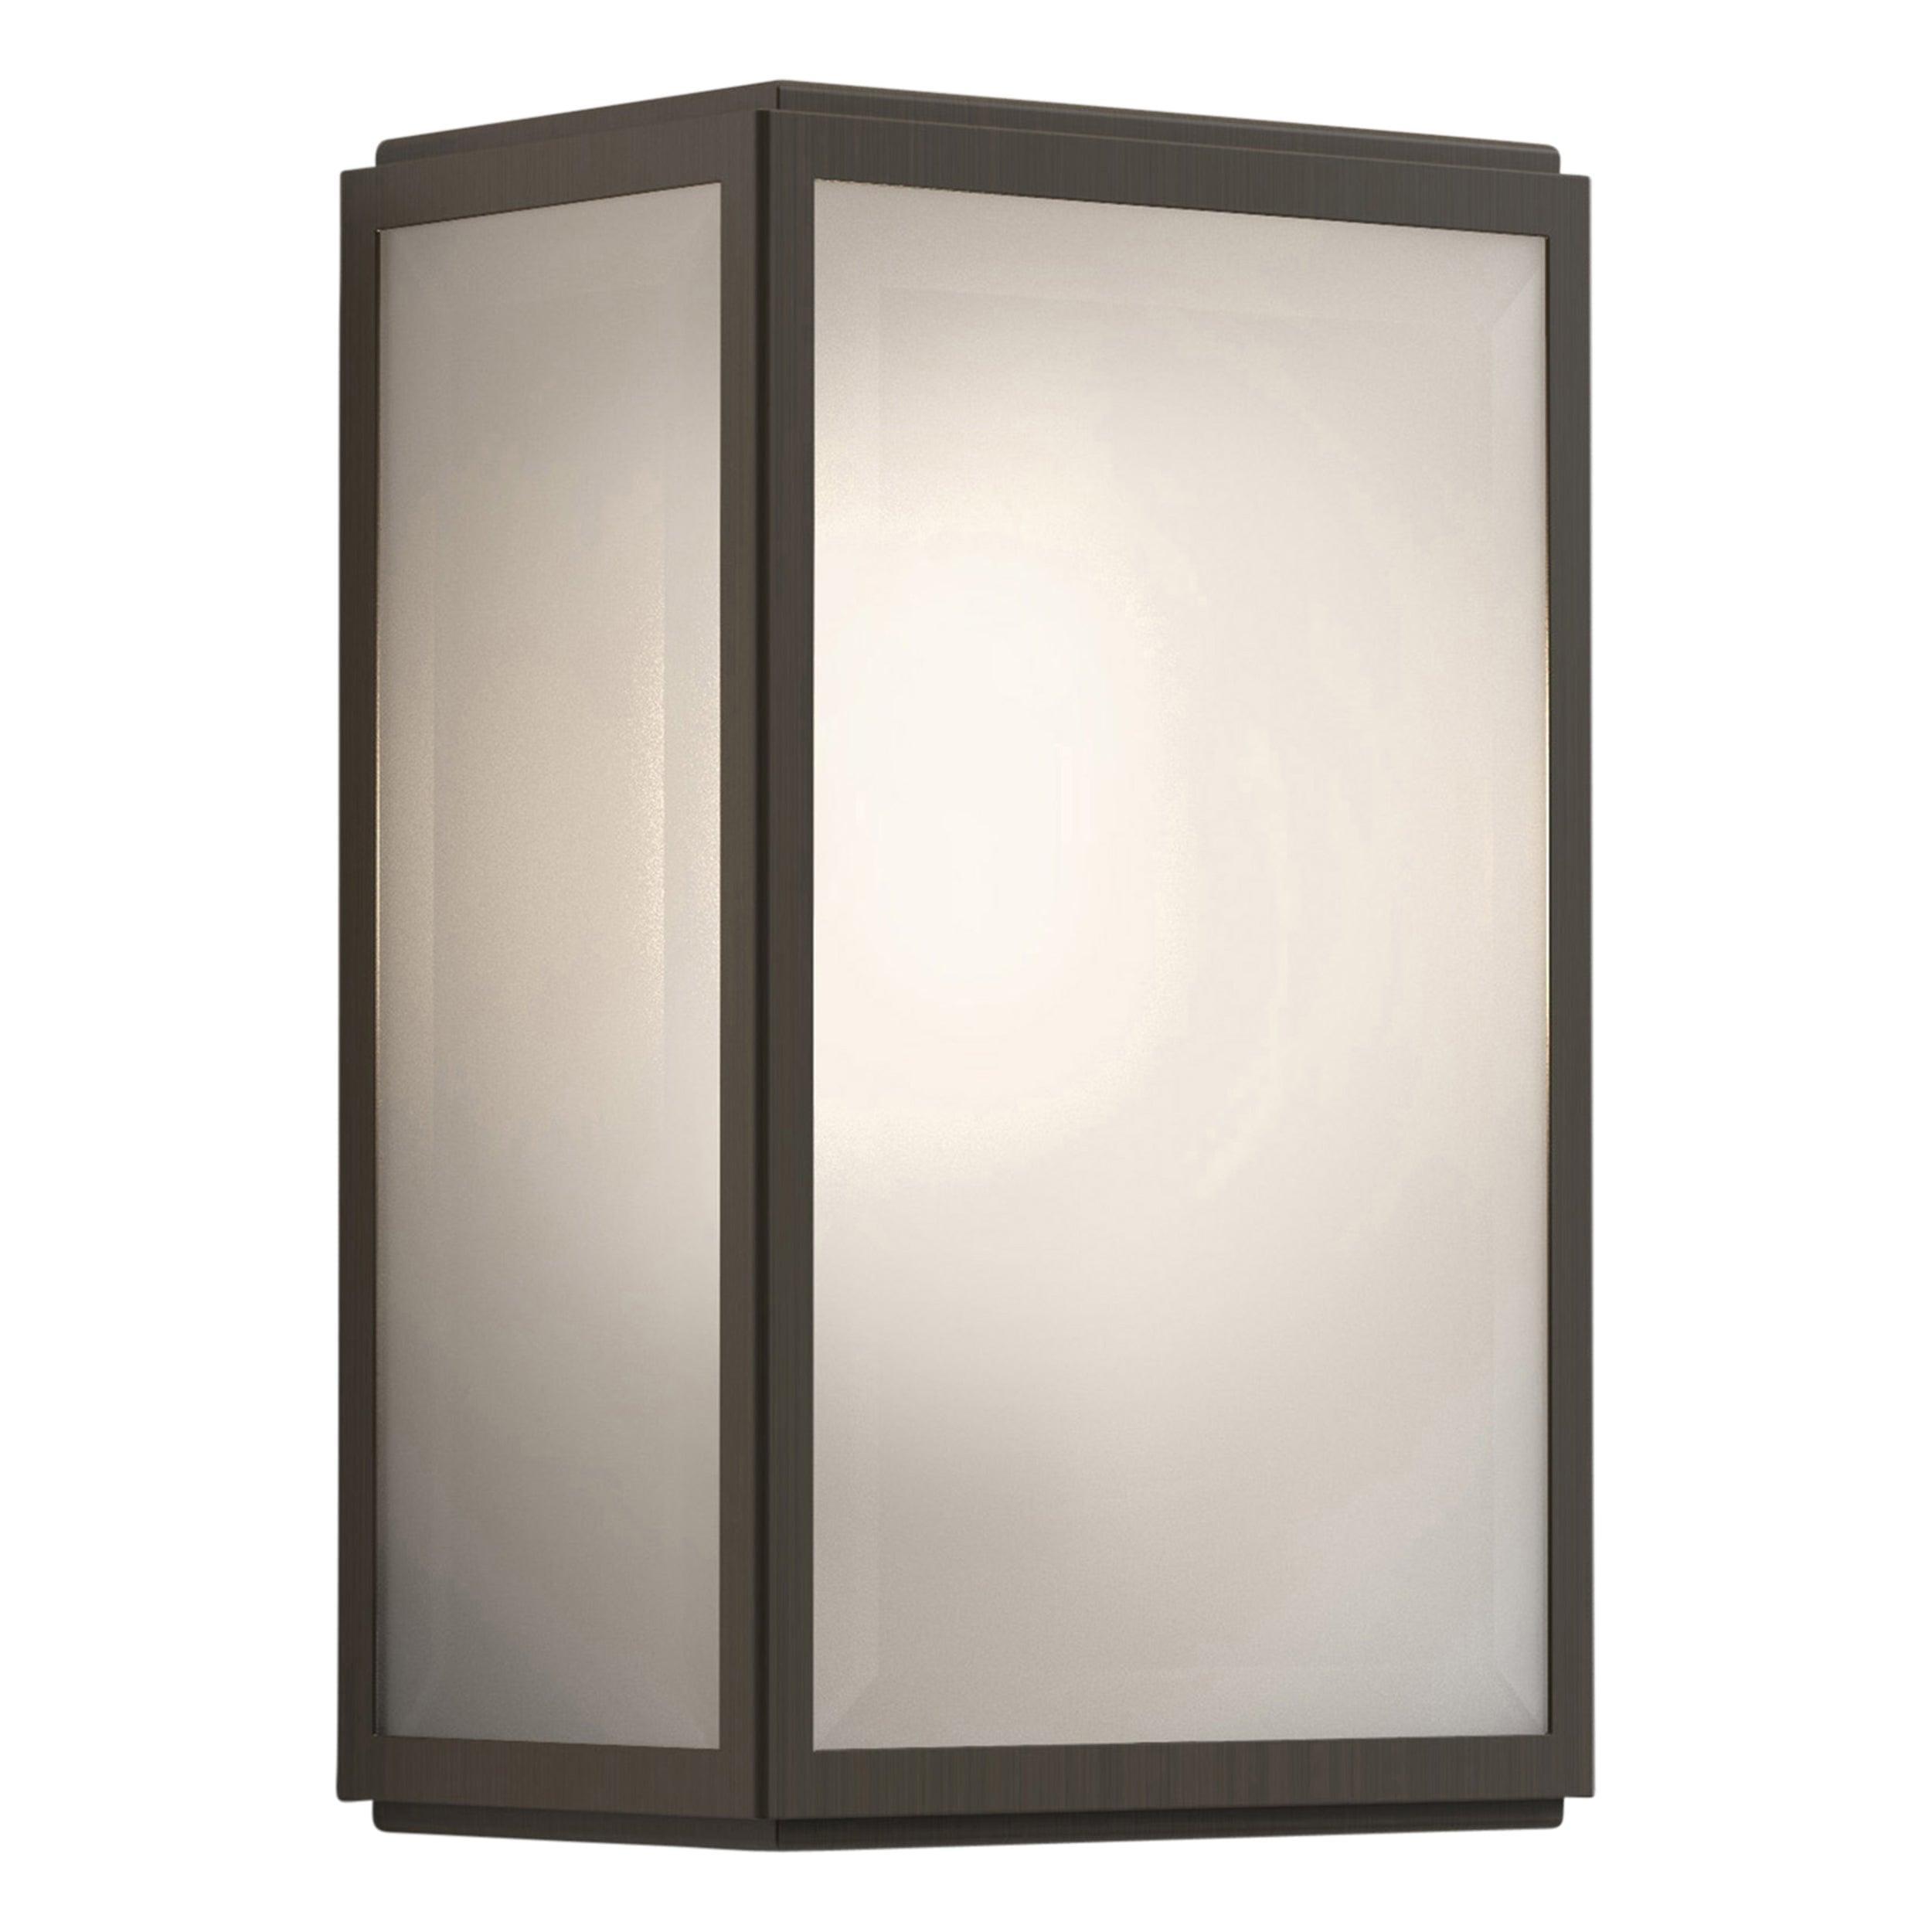 Astro Lighting - Homefield Frosted Wall Light - 1095023 | Montreal Lighting & Hardware